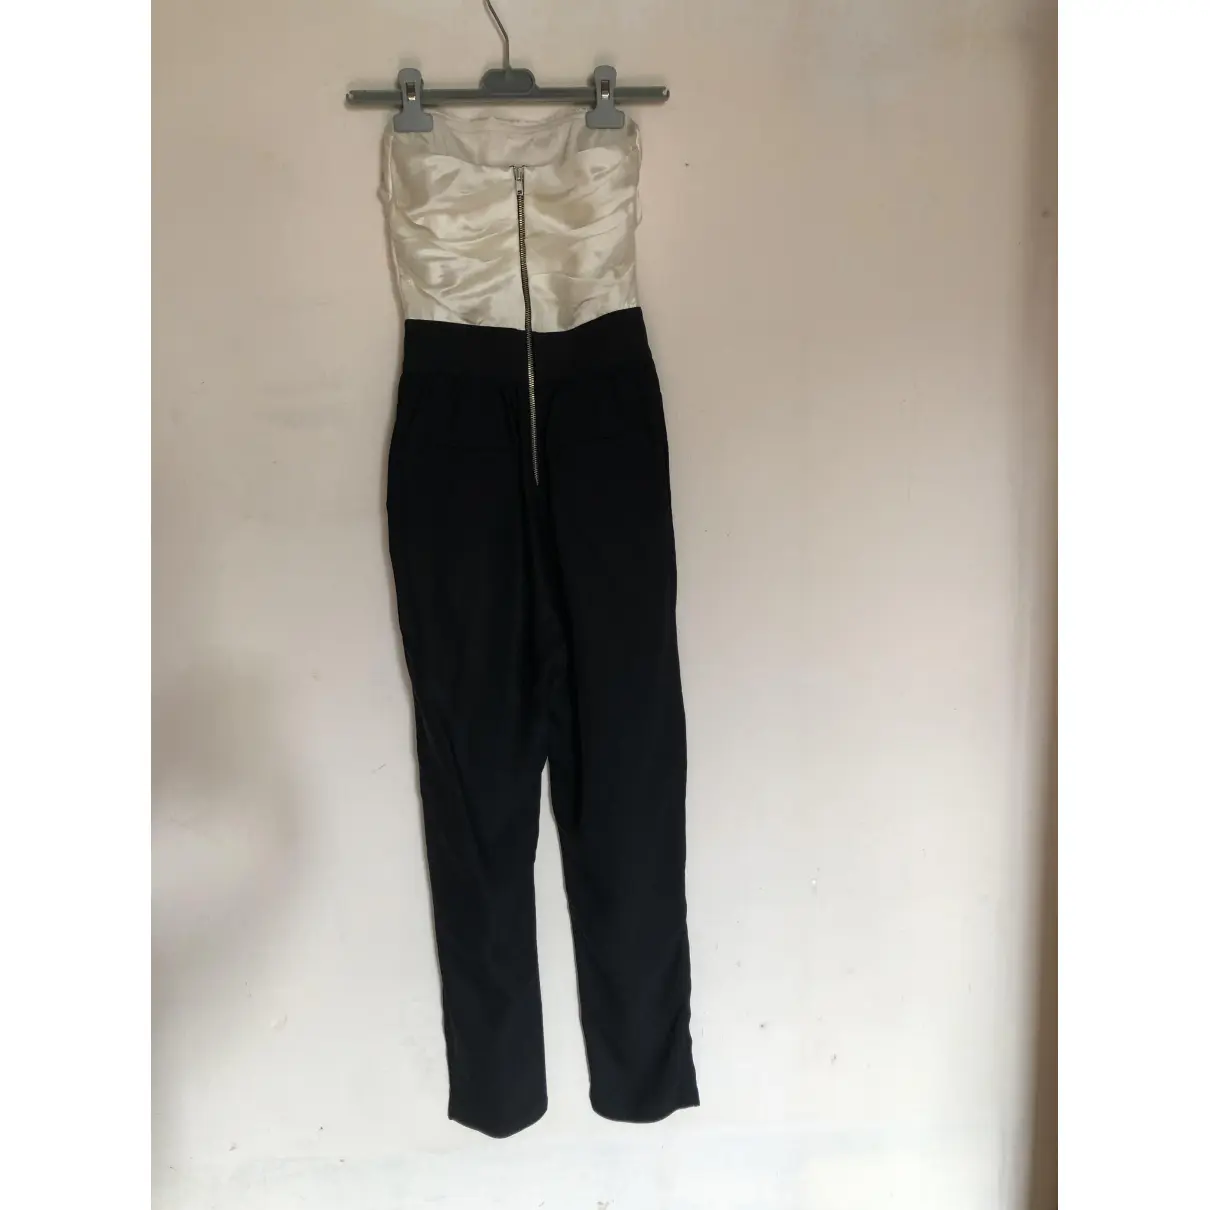 Buy Band Of Outsiders Jumpsuit online